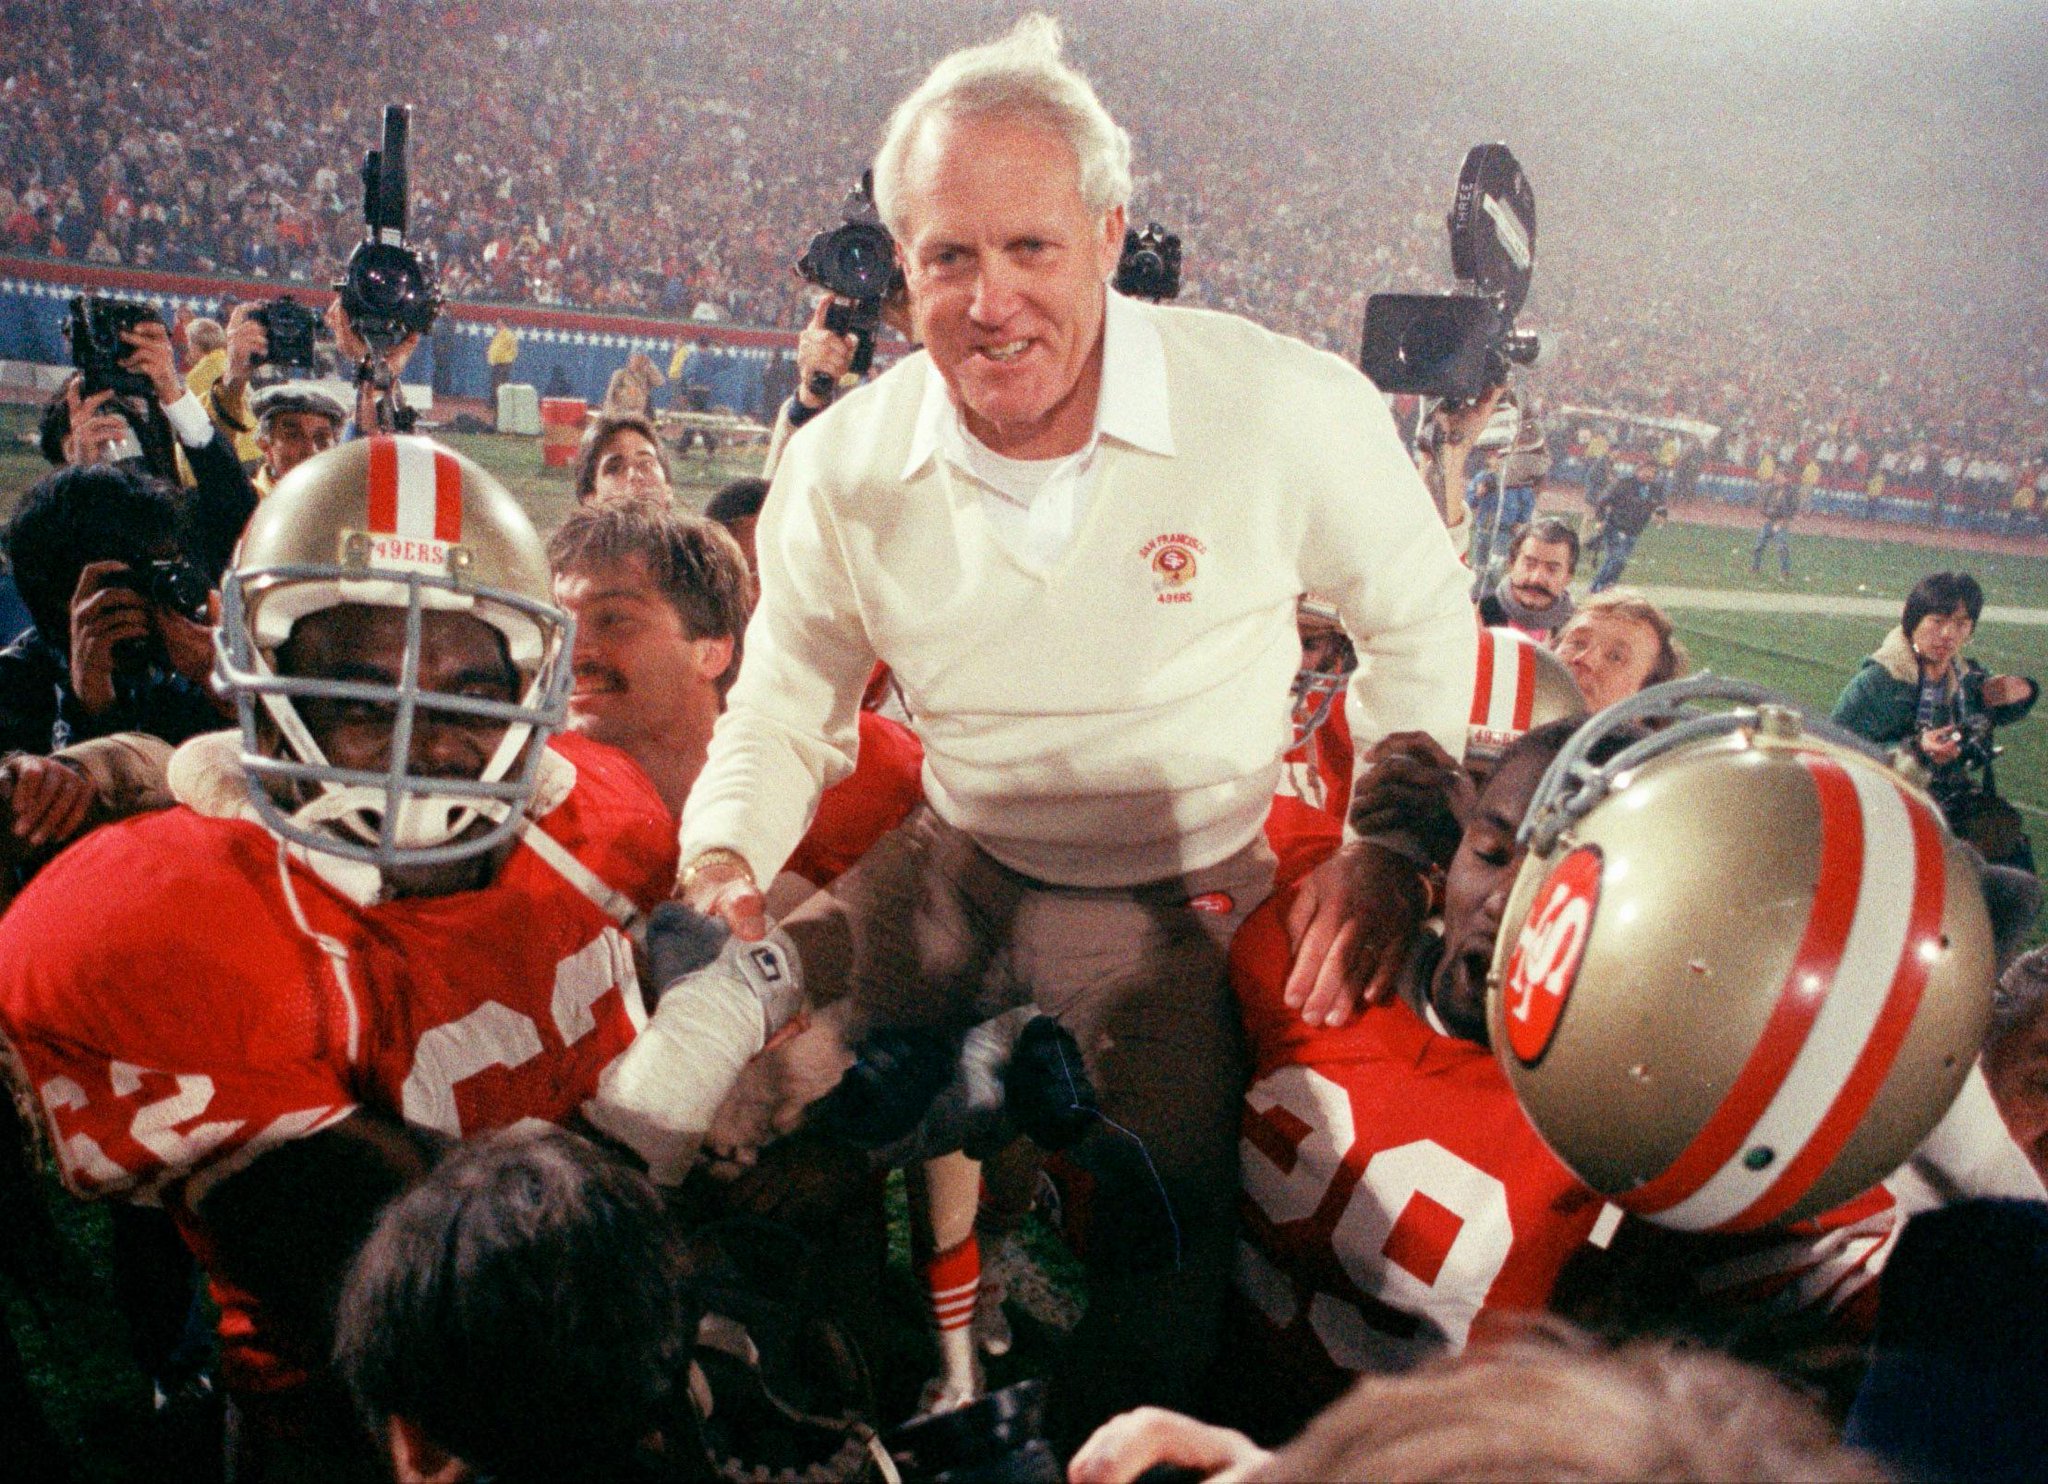 Happy Birthday to Bill Walsh, who would have turned 86 today! 